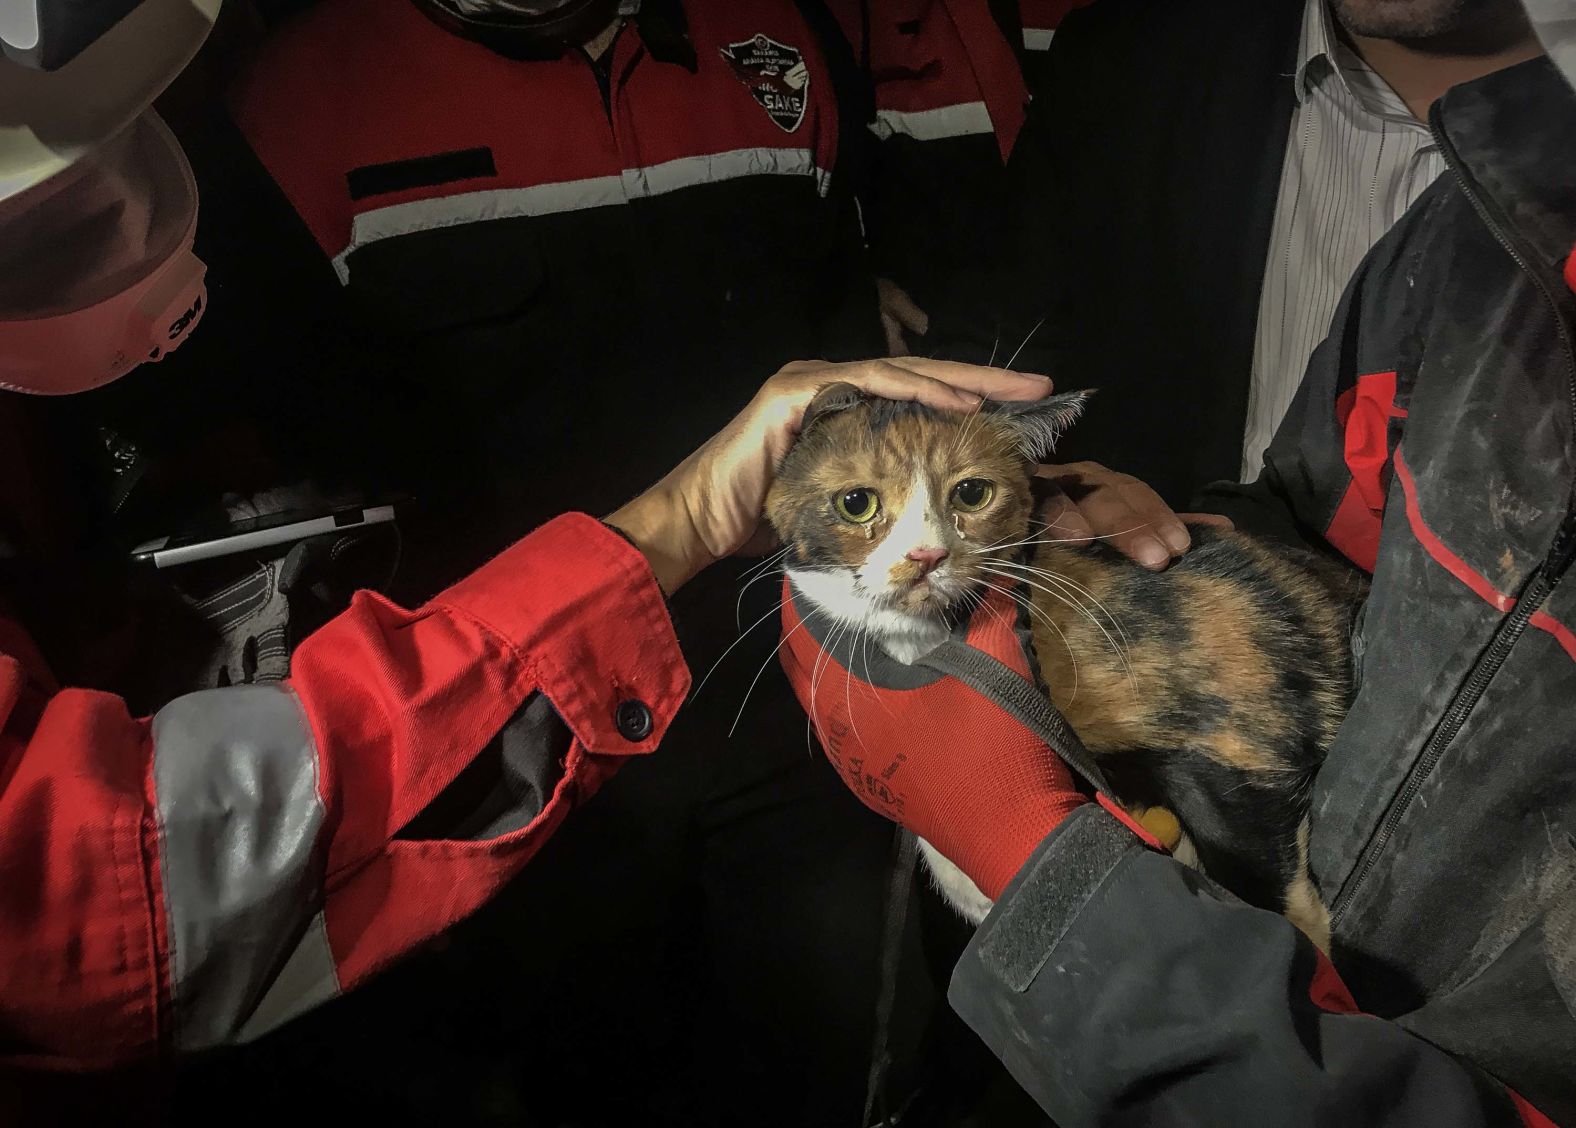 This rescued cat was found by a search dog and pulled from the debris in Izmir.